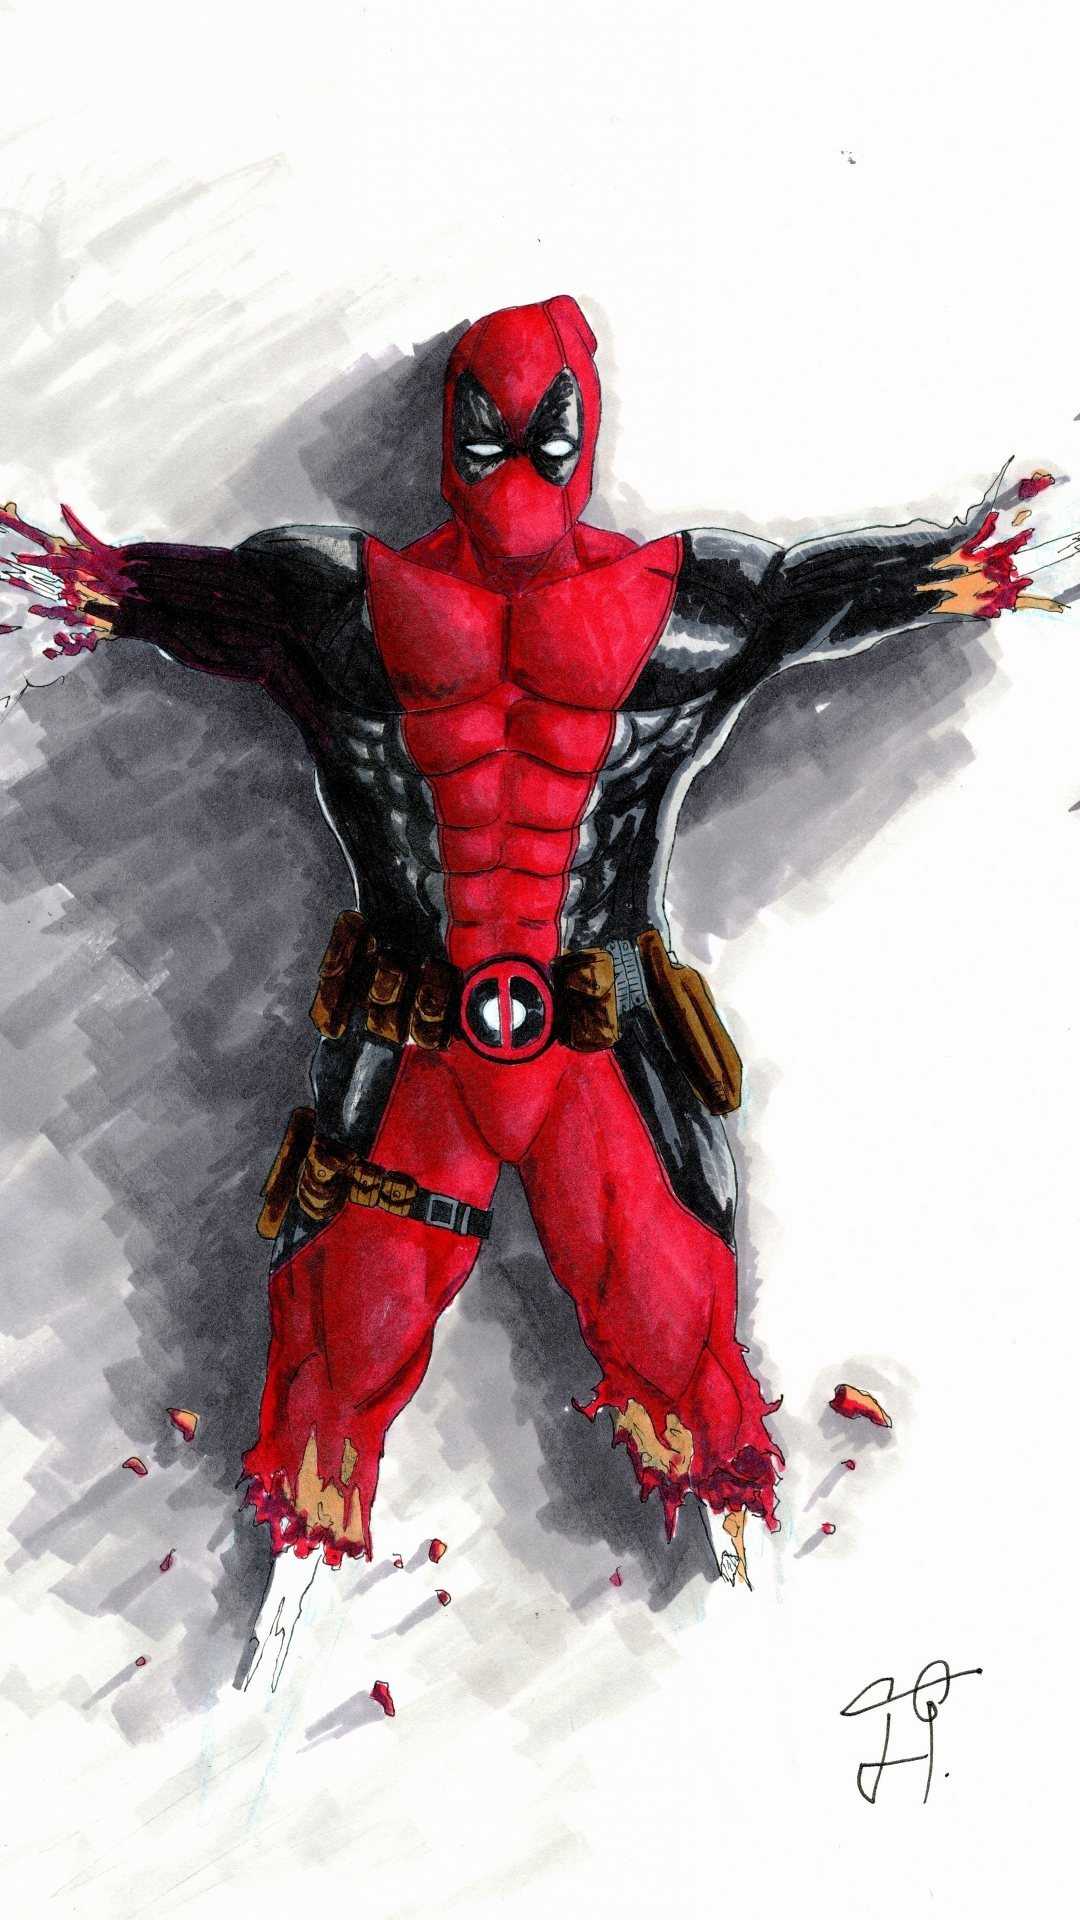 1080x1920 Deadpool Wallpapers for Android Mobile Smartphone Full HD